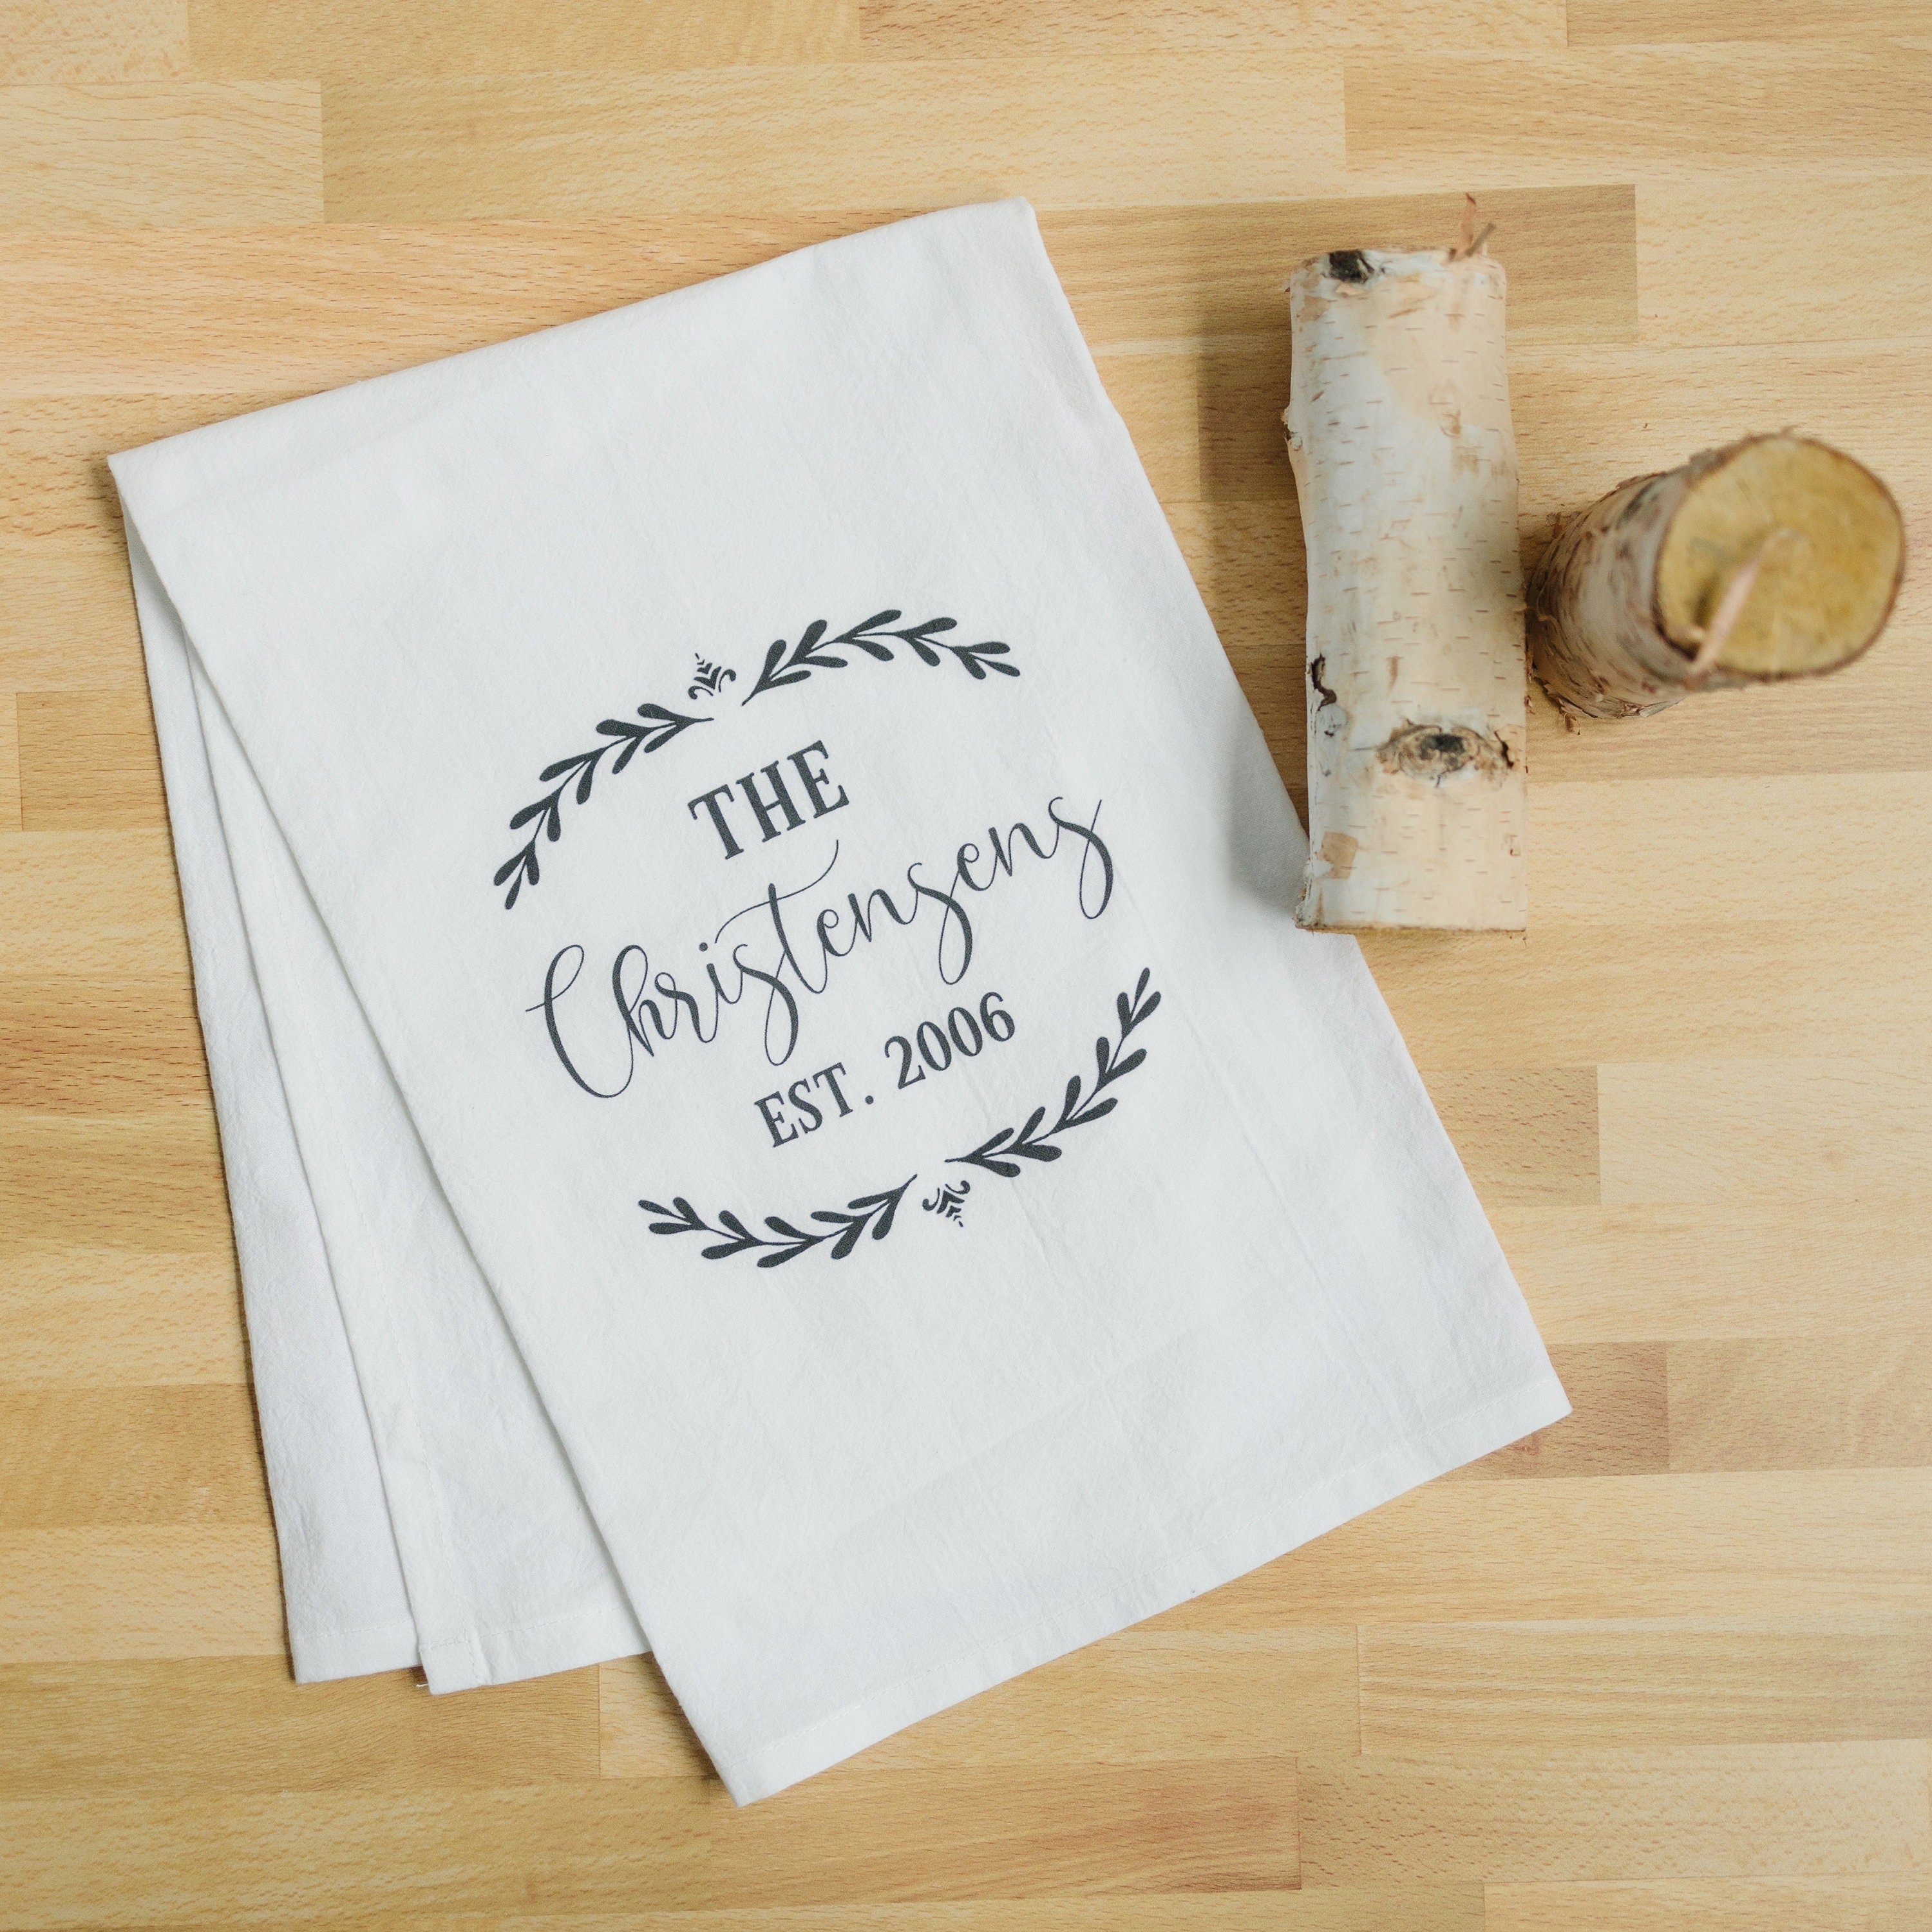 Mr & Mrs Wedding Gift - Words with Boards, LLC